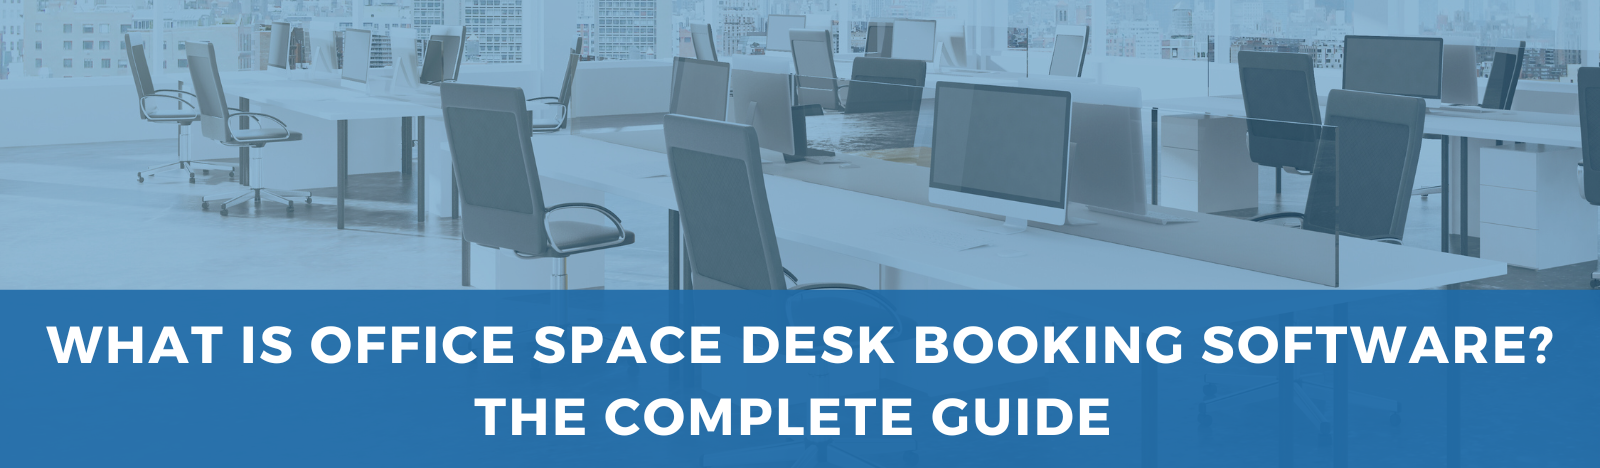 What is Office Space Desk Booking Software?